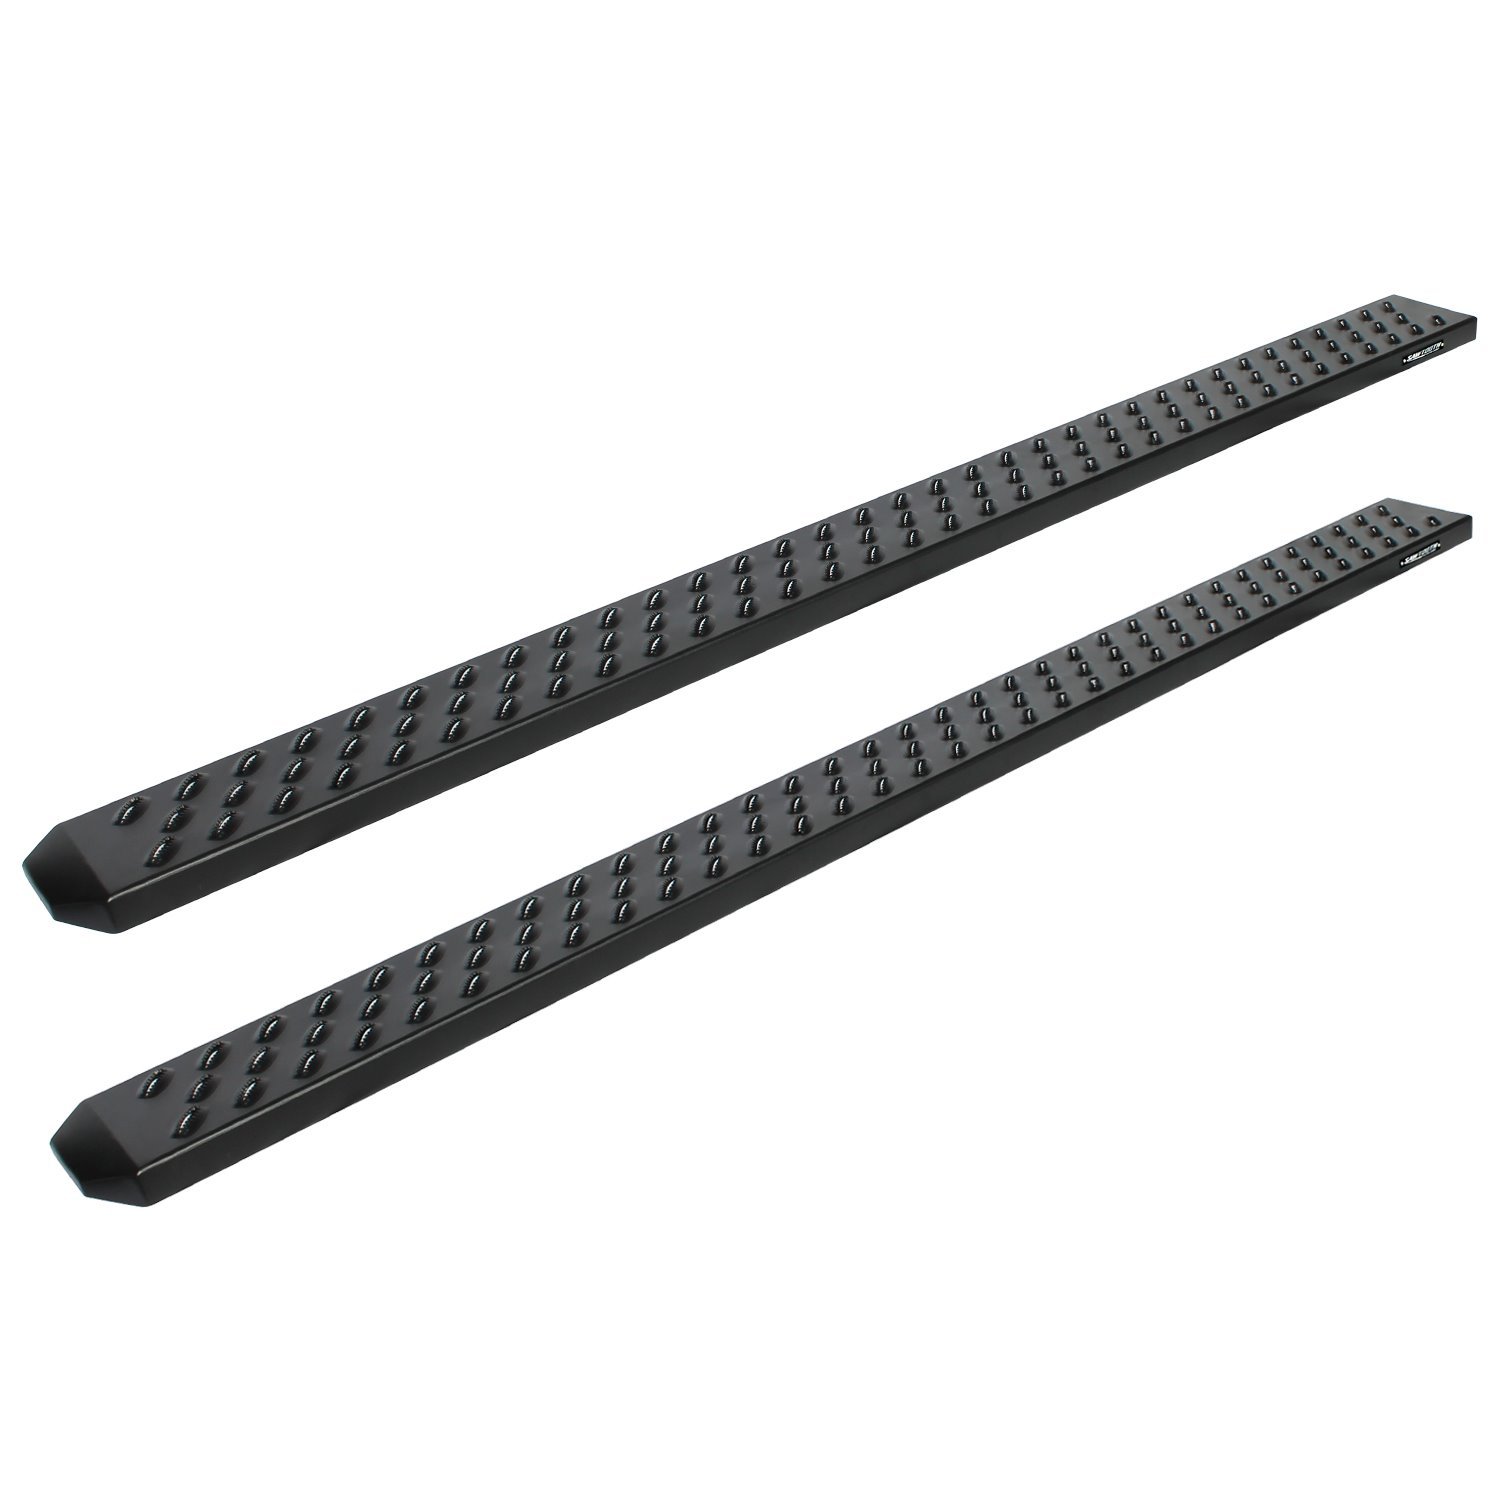 2101-0342BT 6.5 in Sawtooth Slide Track Running Boards, Black Aluminum, Fits Select Chevy Colorado/GMC Canyon